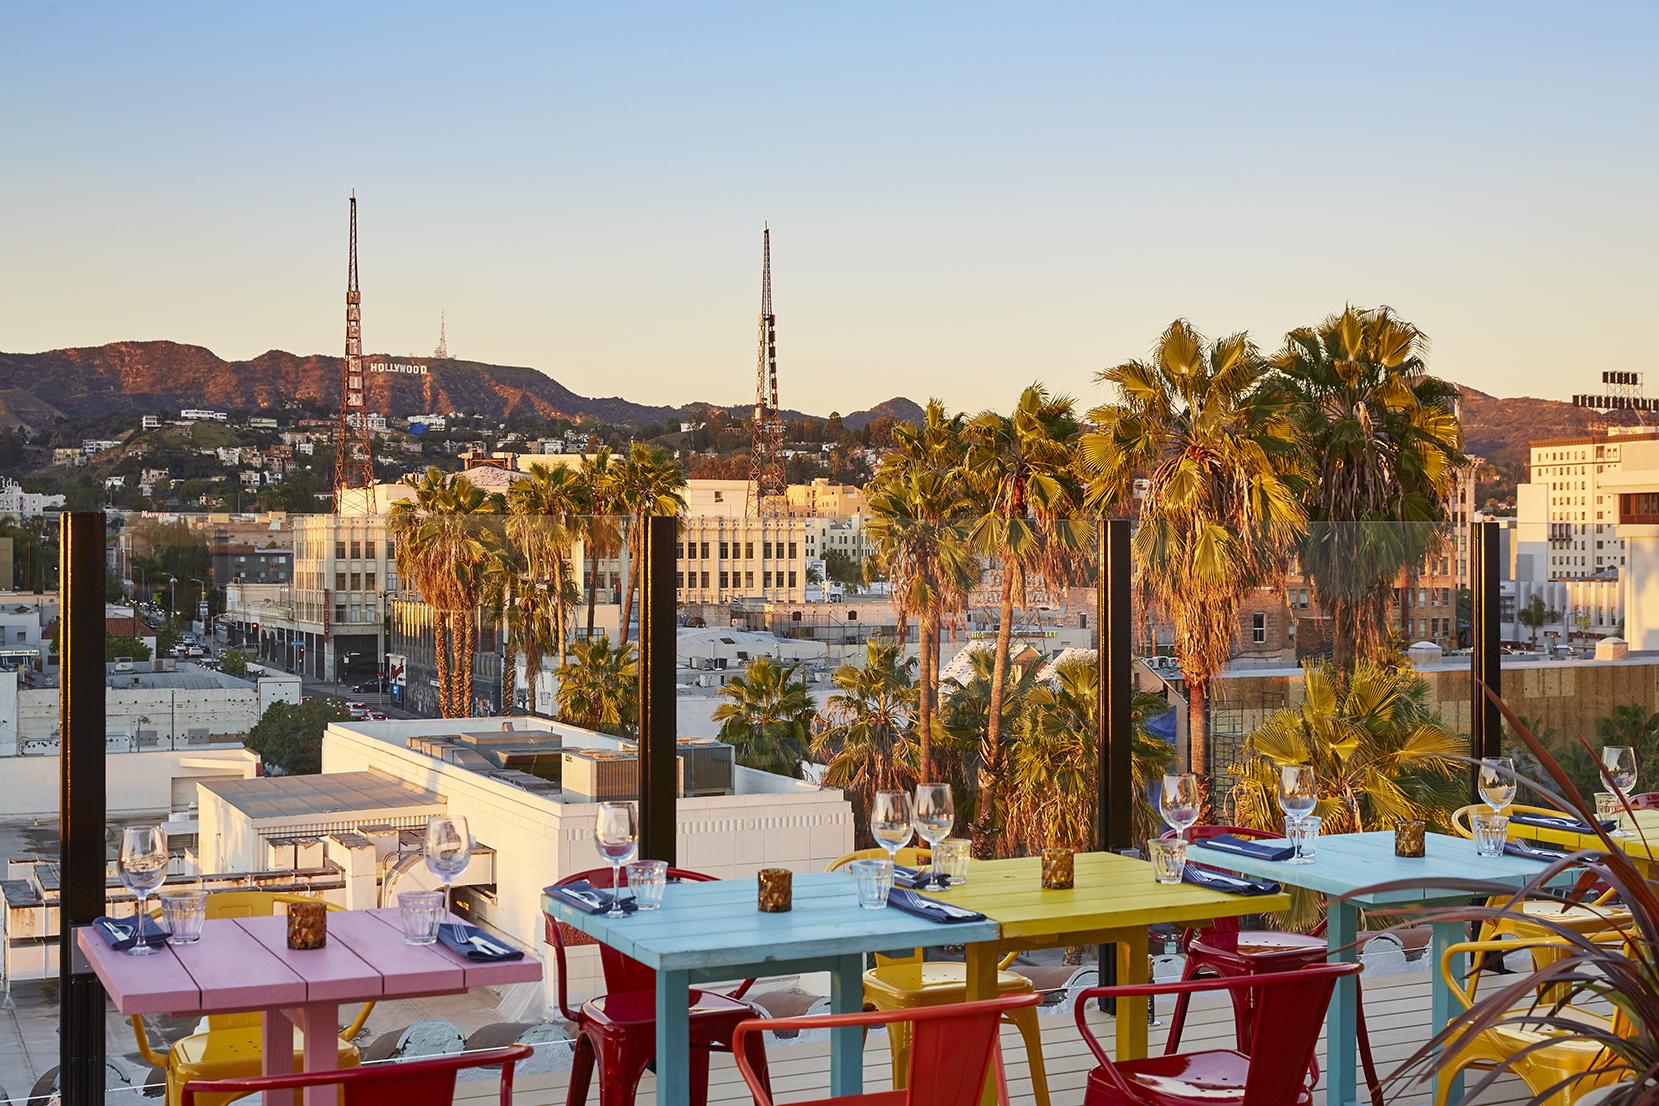 Come to Mama: the rooftop bar and restaurant has sweeping views from the Hollywood sign to the Pacific